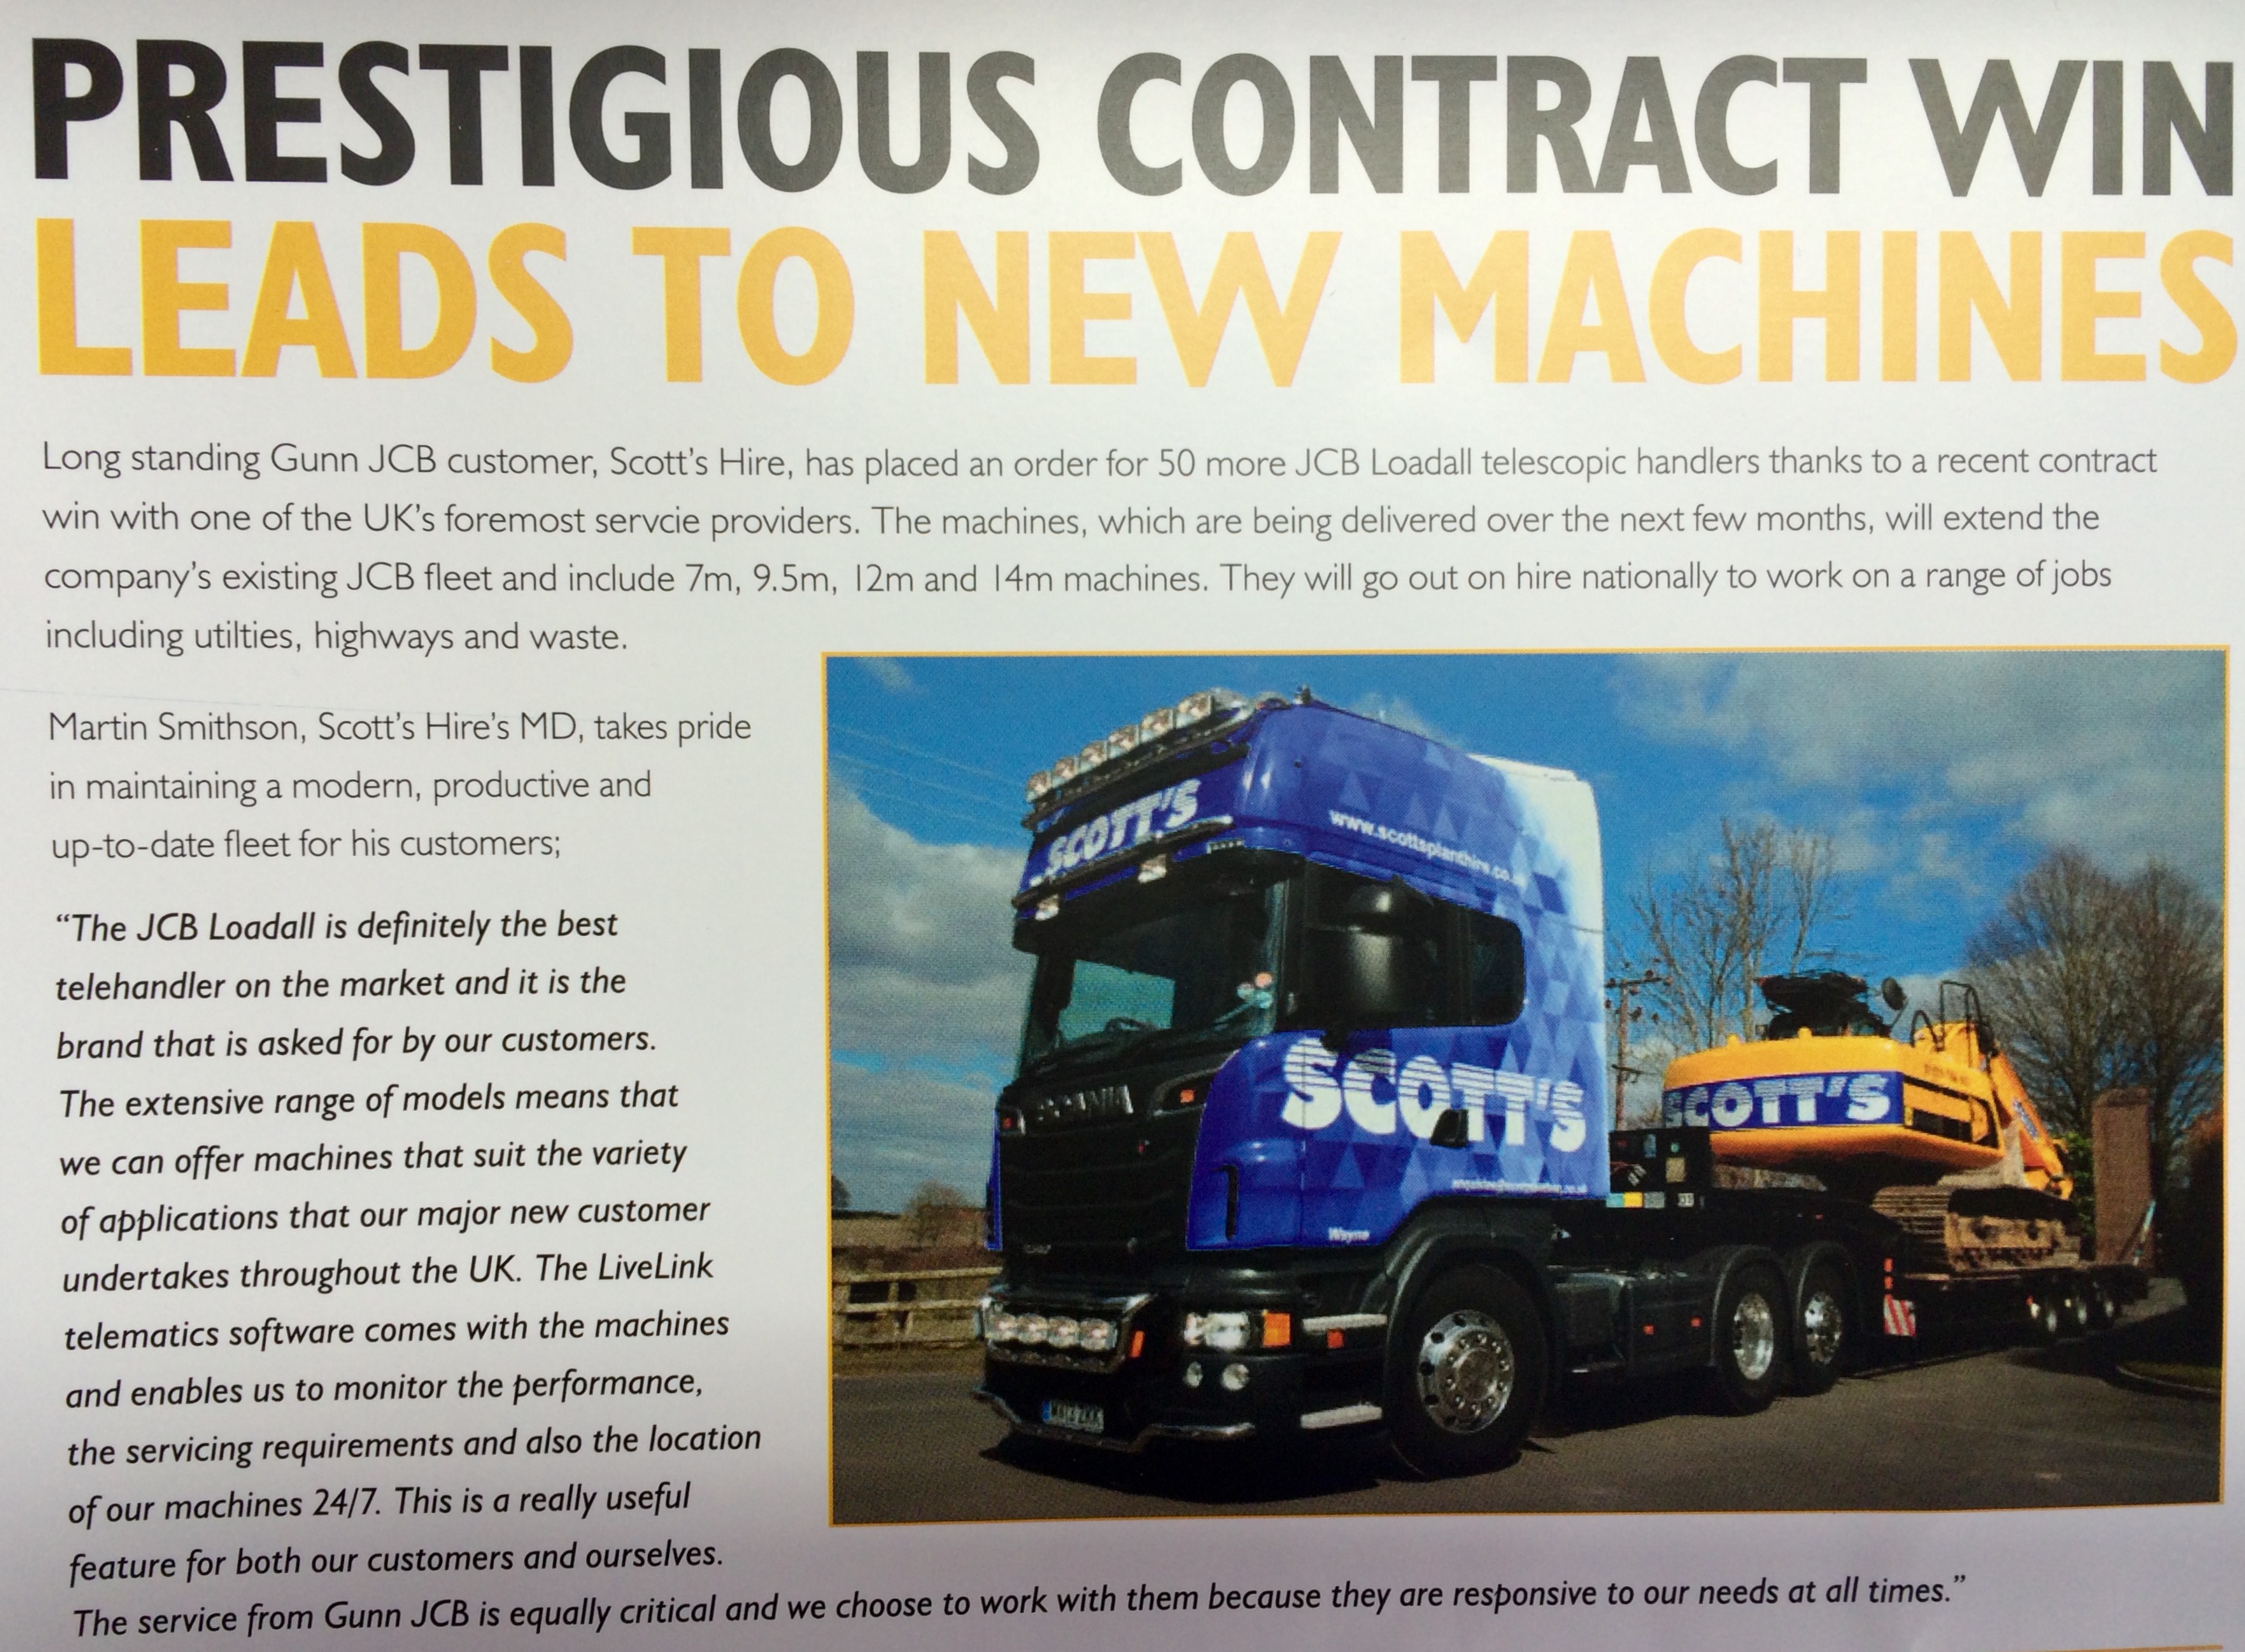 A short press release on a recent order we placed with Gunn JCB